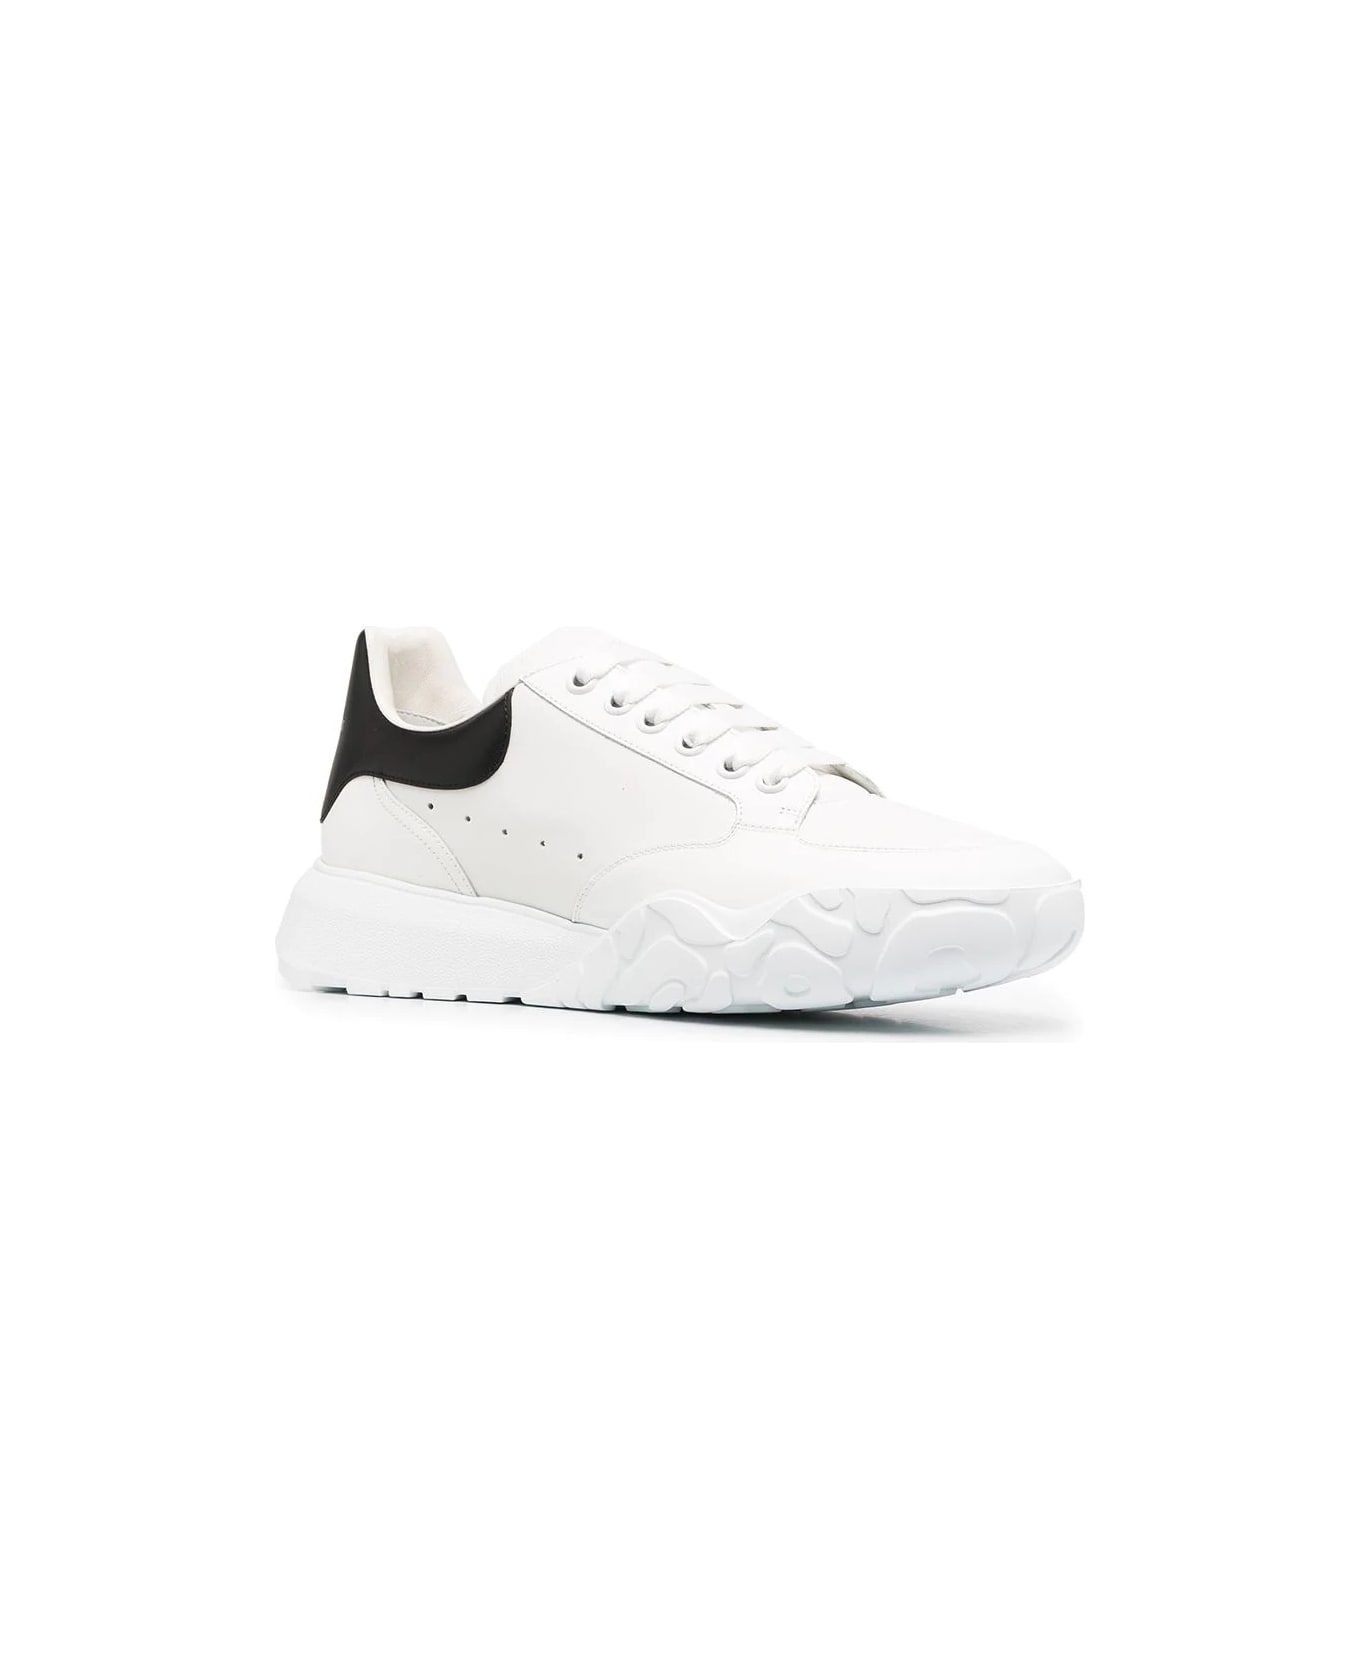 Alexander McQueen Trainer Court Oversize Sneakers In White And Black - White